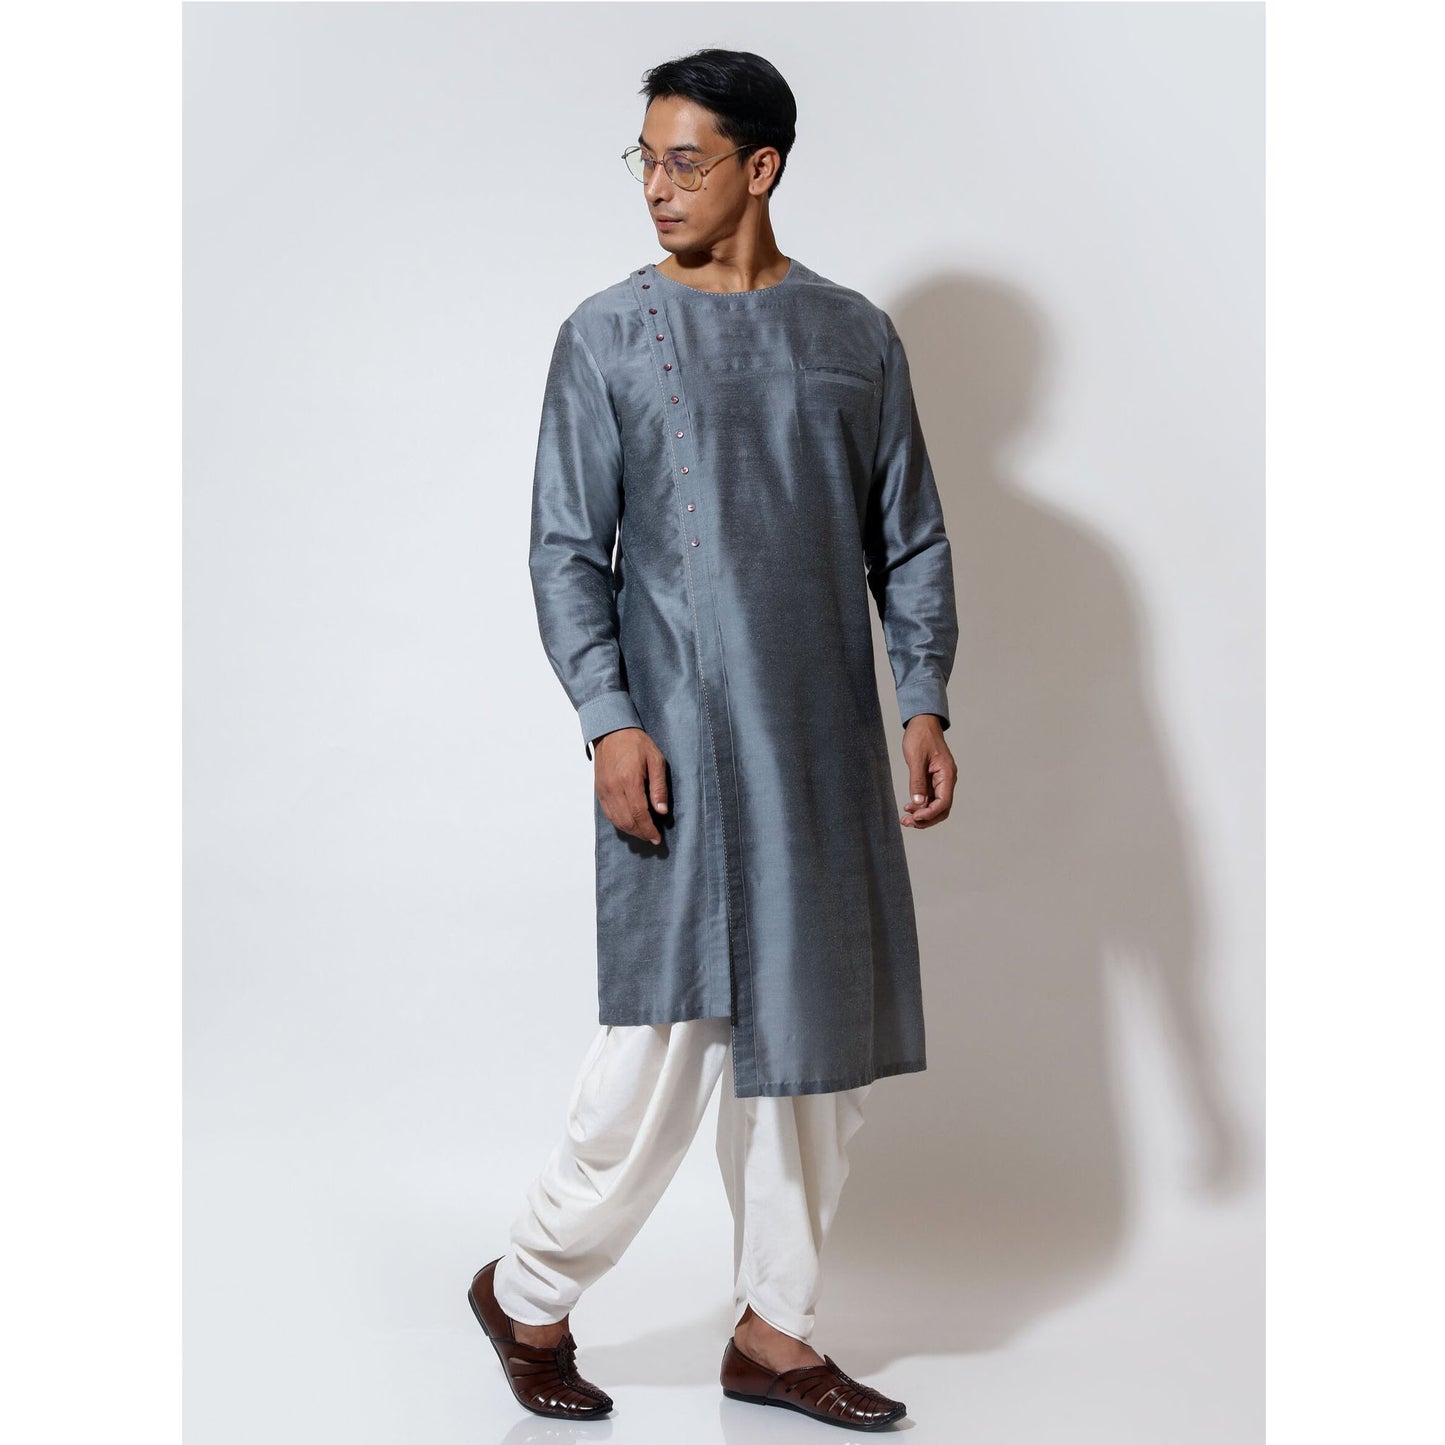 Long kurta with up down hem and offcentre open